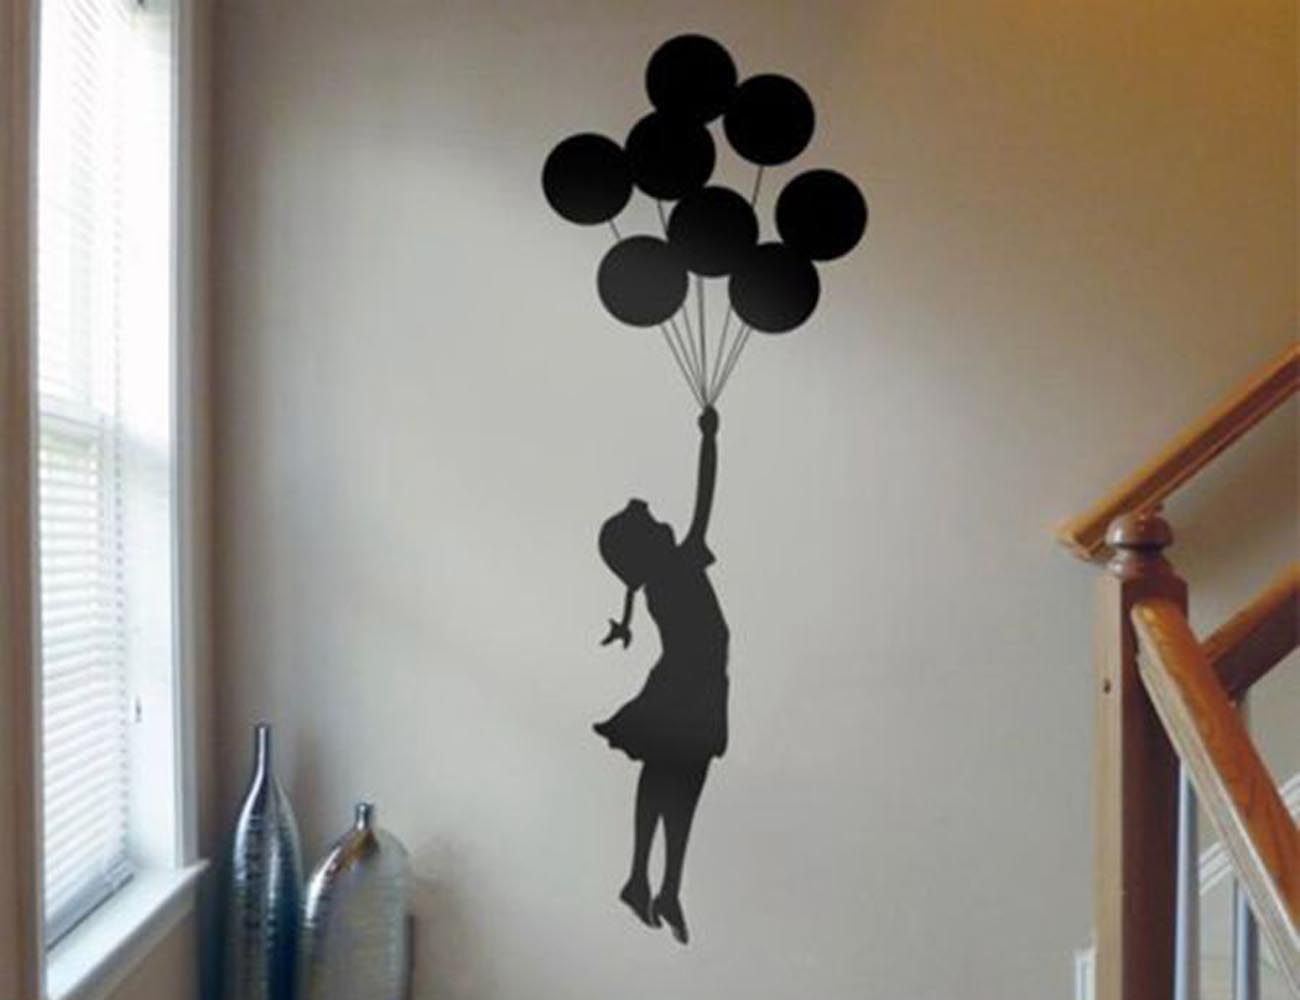 Floating Balloon Wall Sticker – Displaying the Exquisite Banksy Art